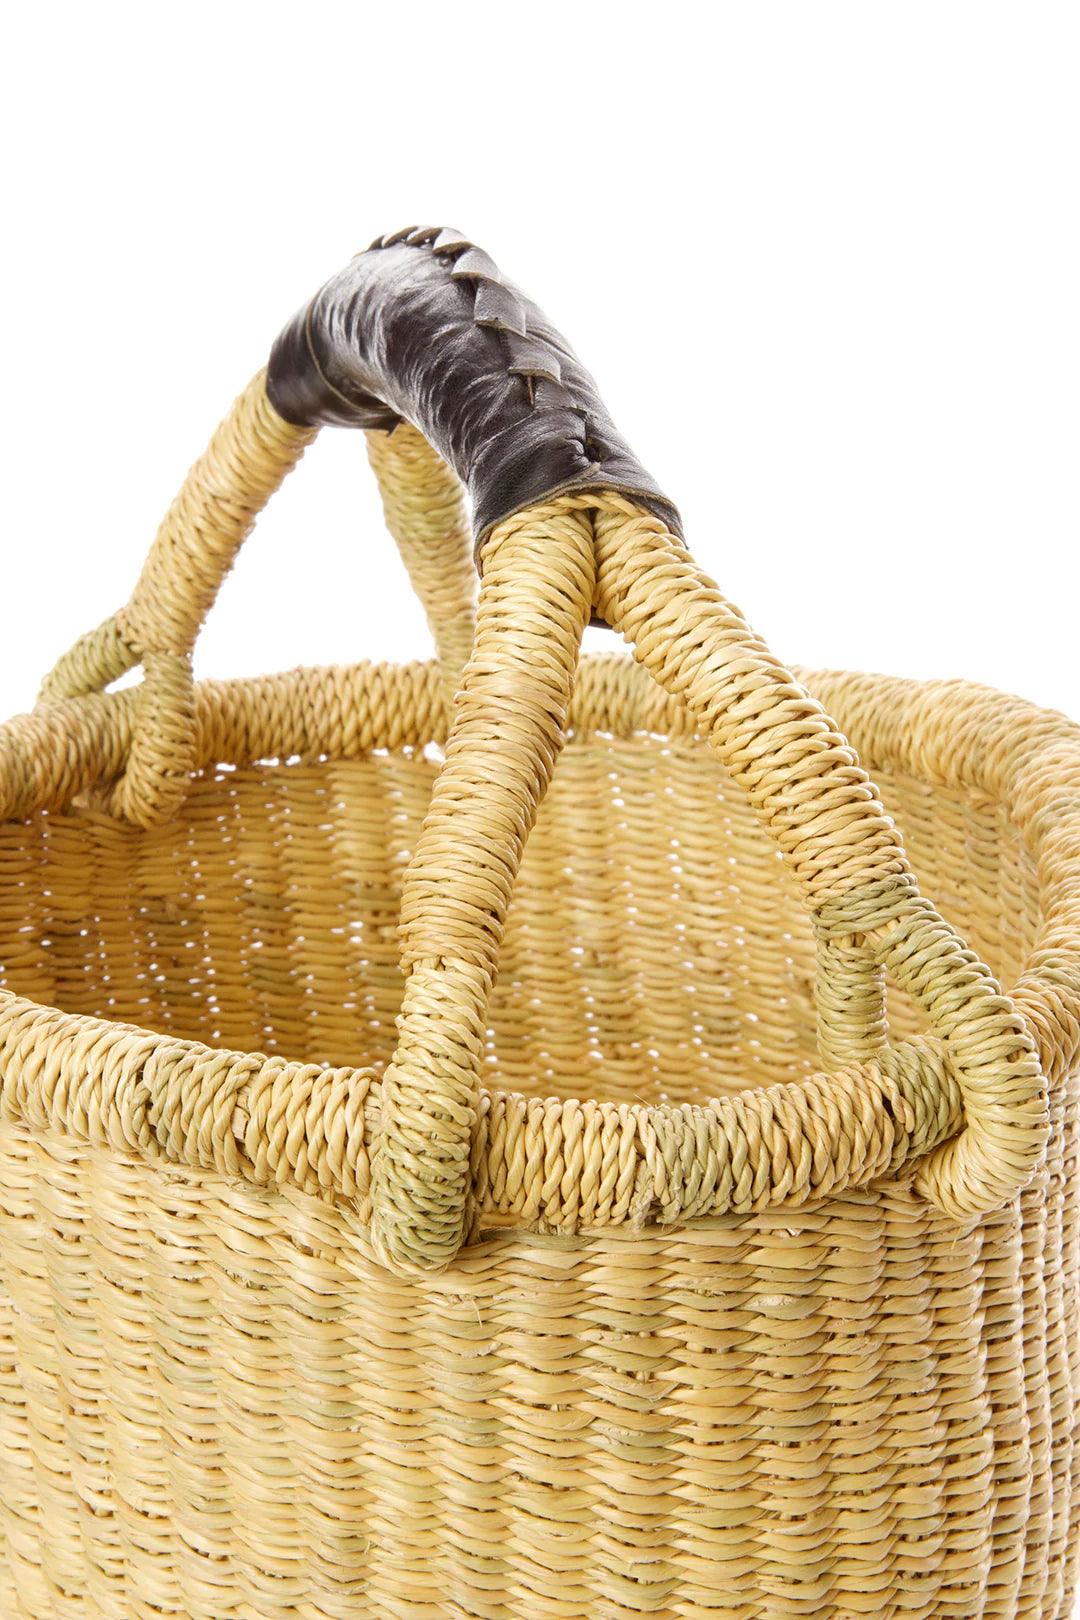 Baby Bolga Basket for Gathering, Decor, Organization and so much more - Ninth & Pine